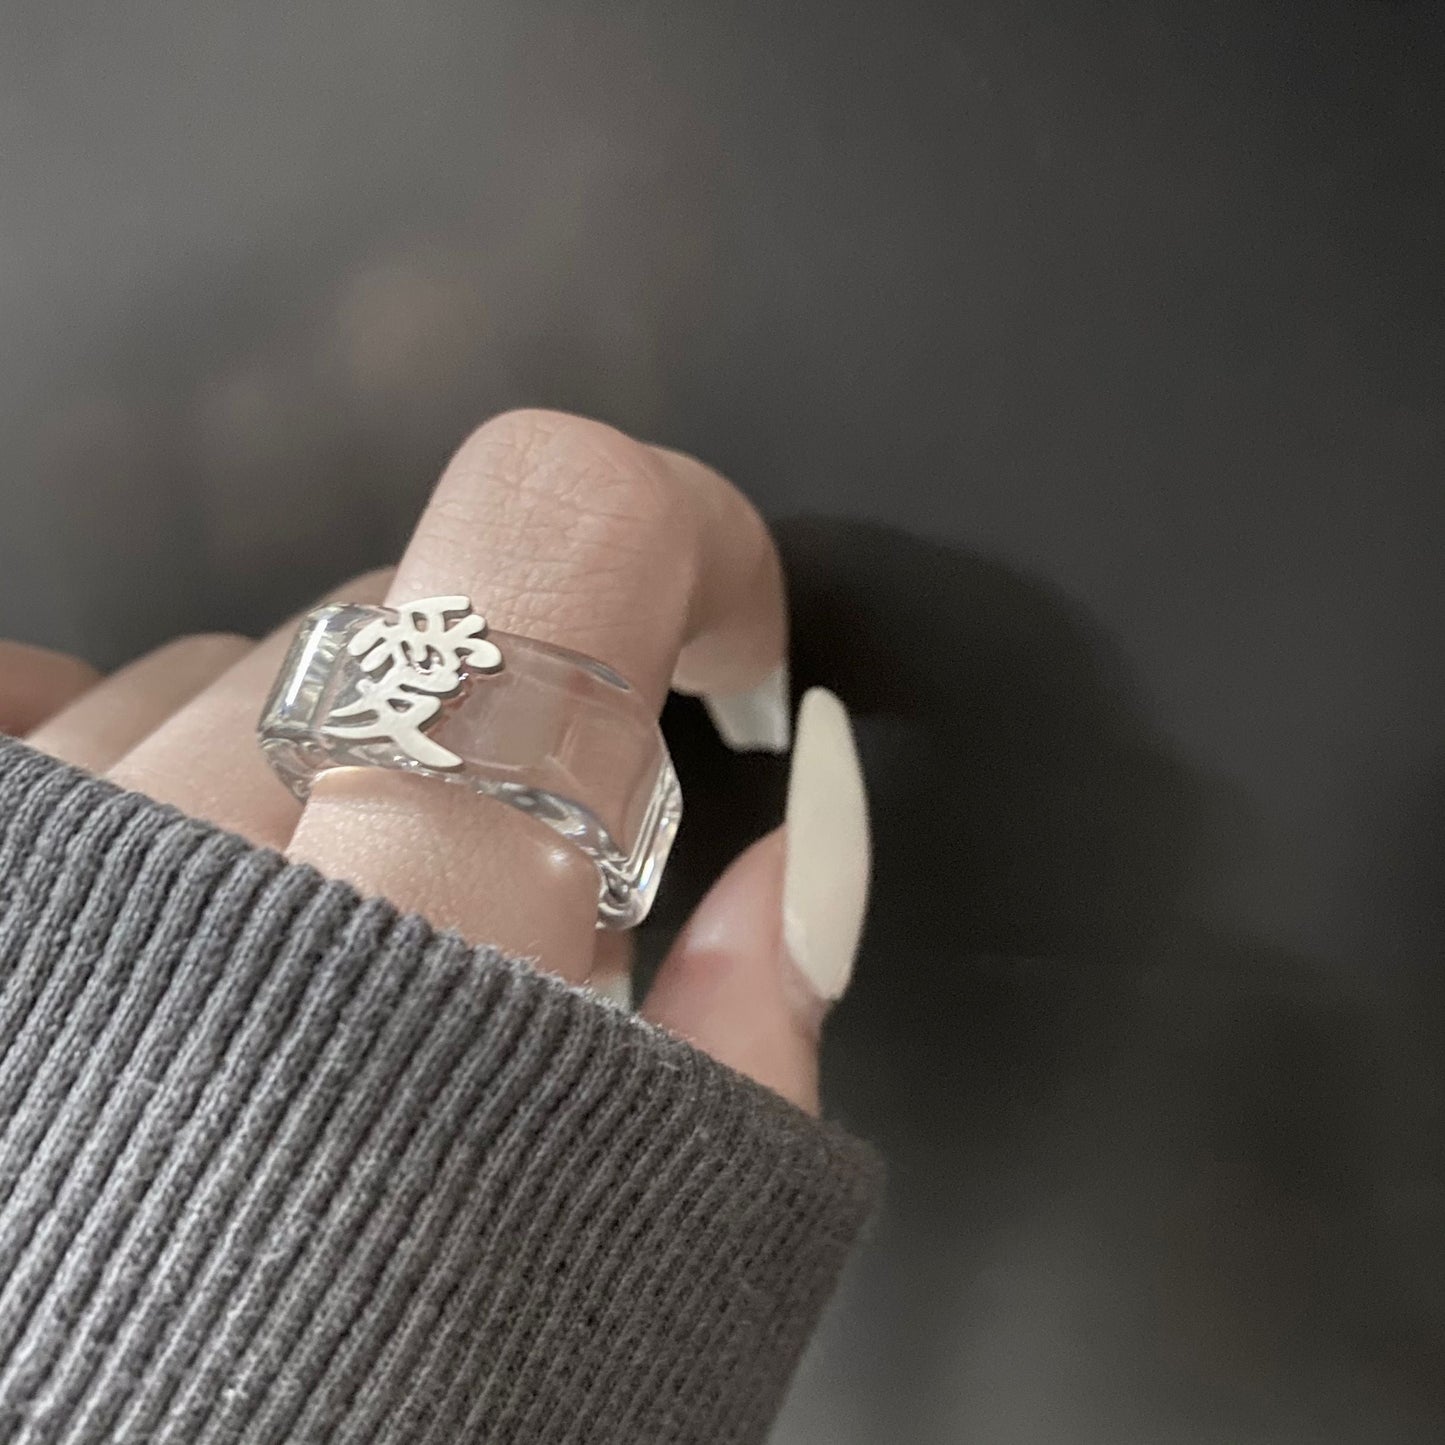 "LOVE" Ring by White Market